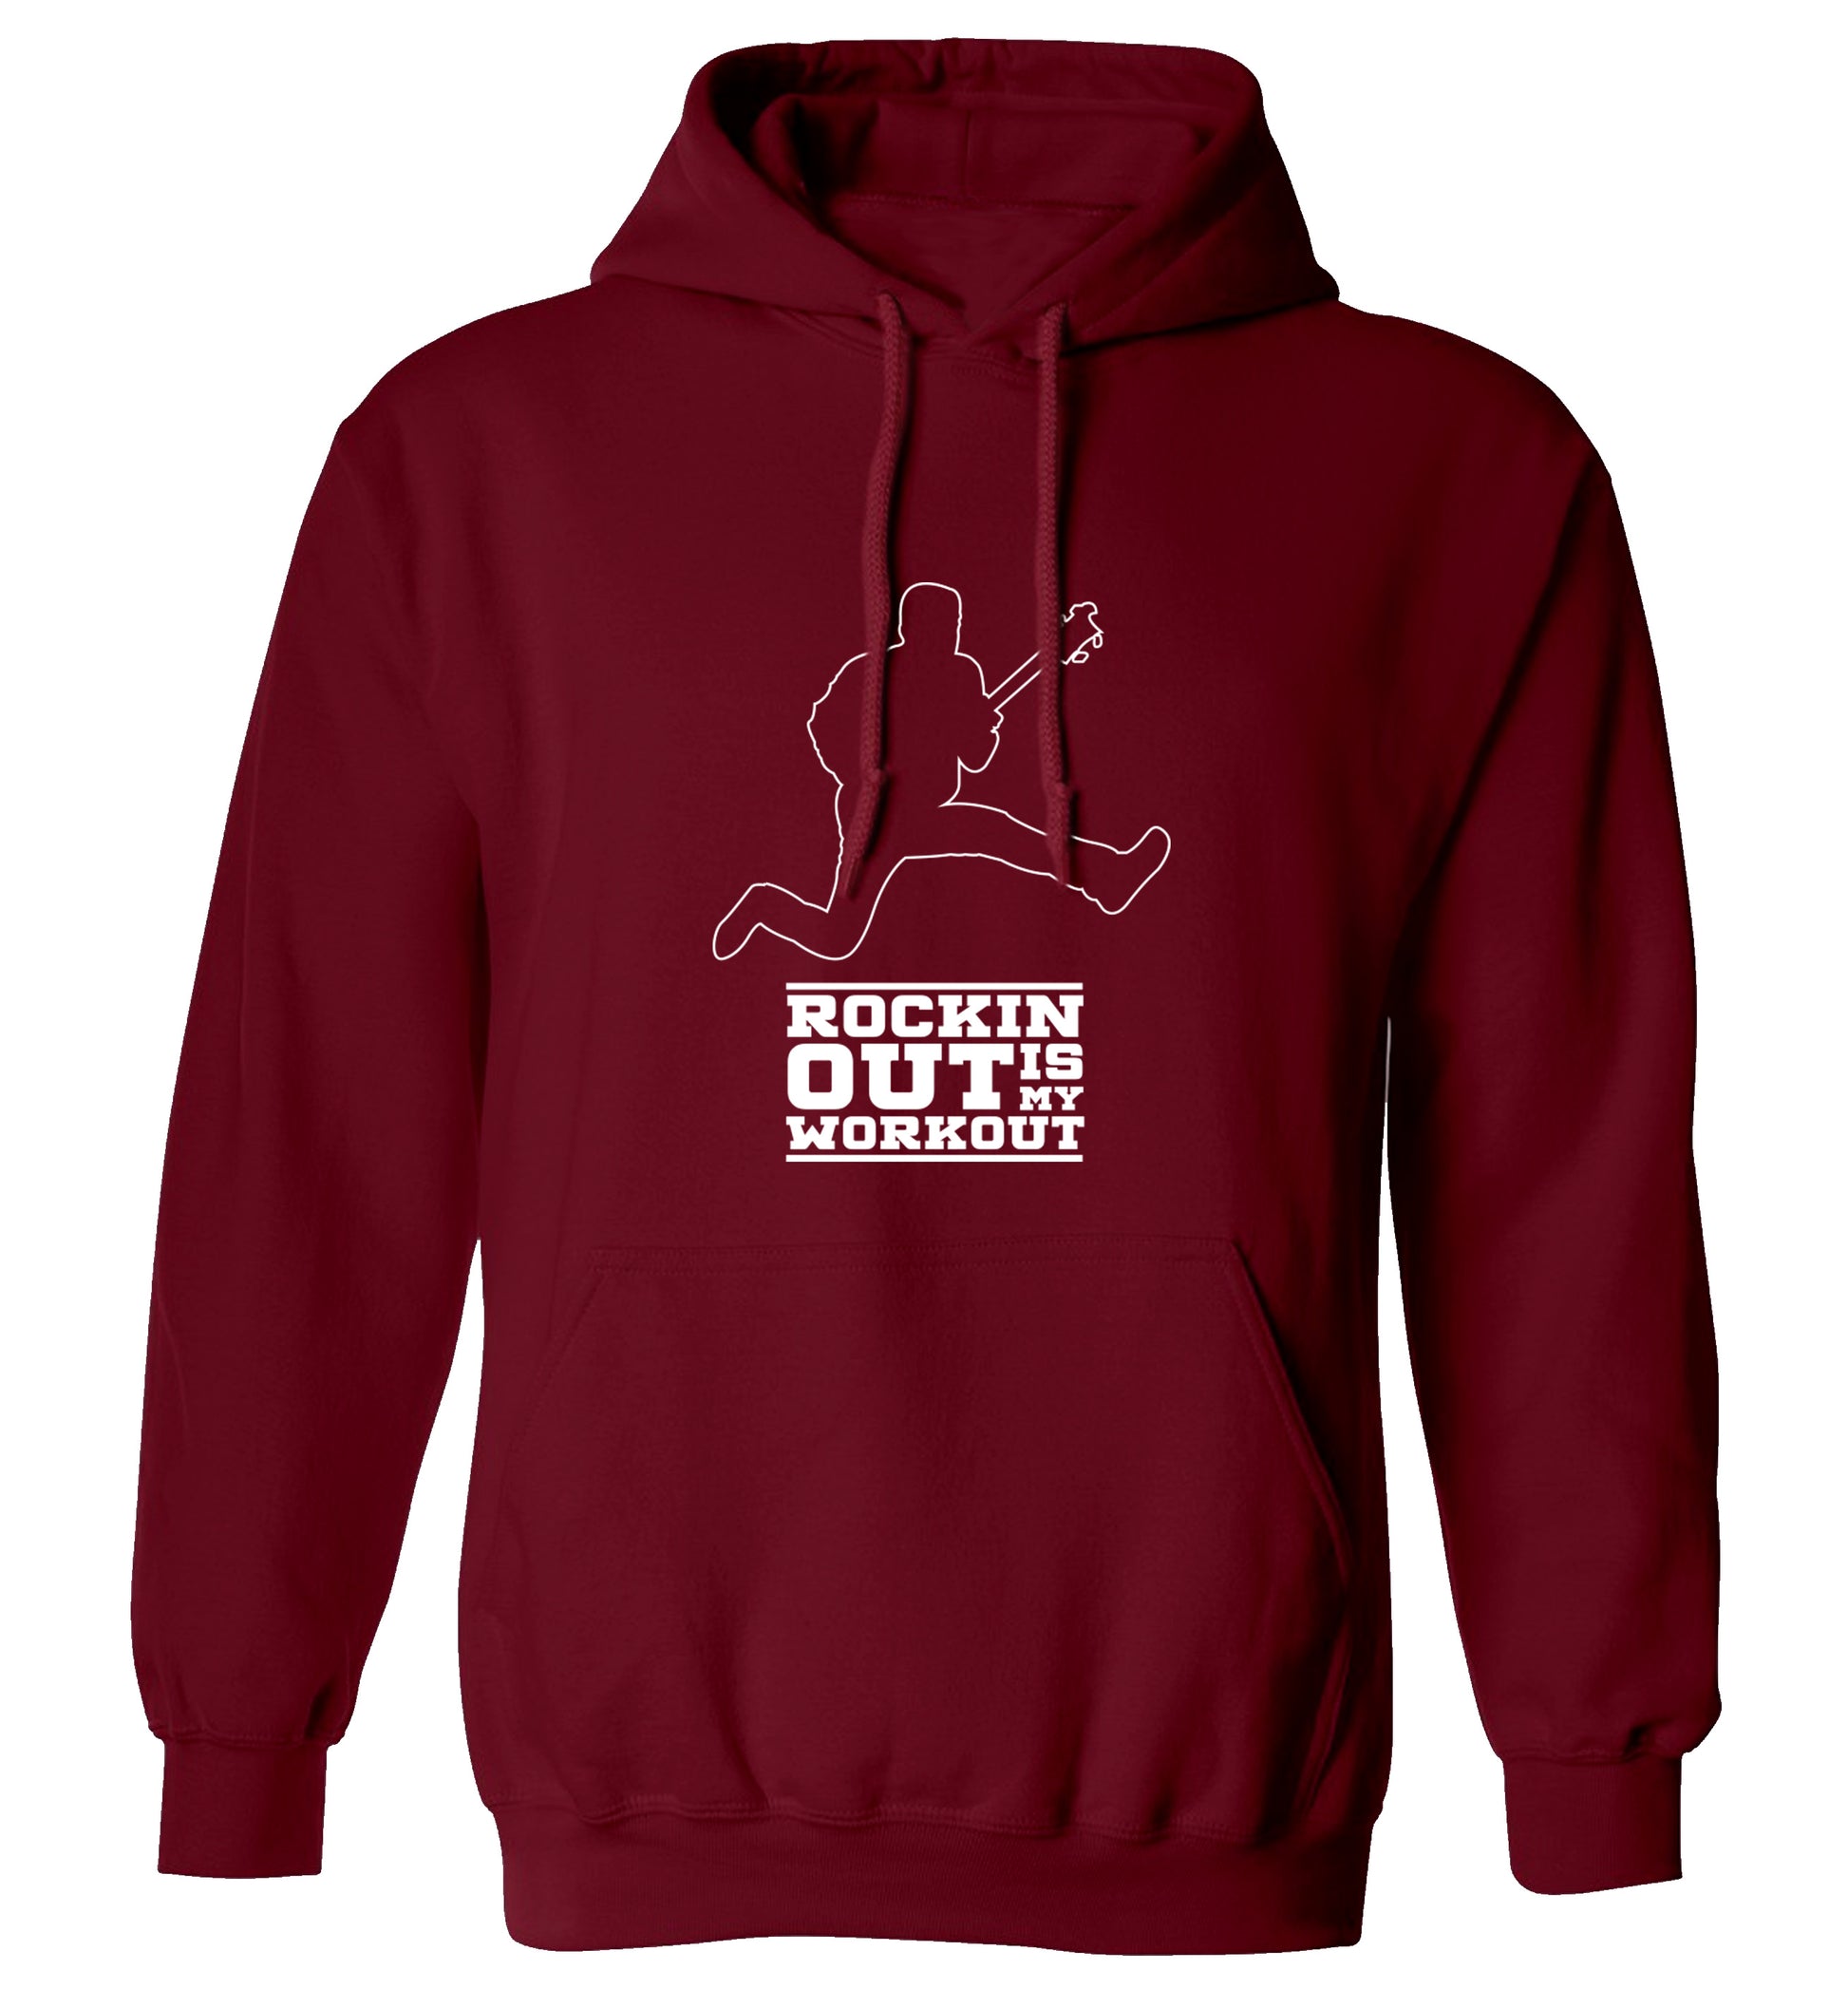 Rockin out is my workout 2 adults unisex maroon hoodie 2XL